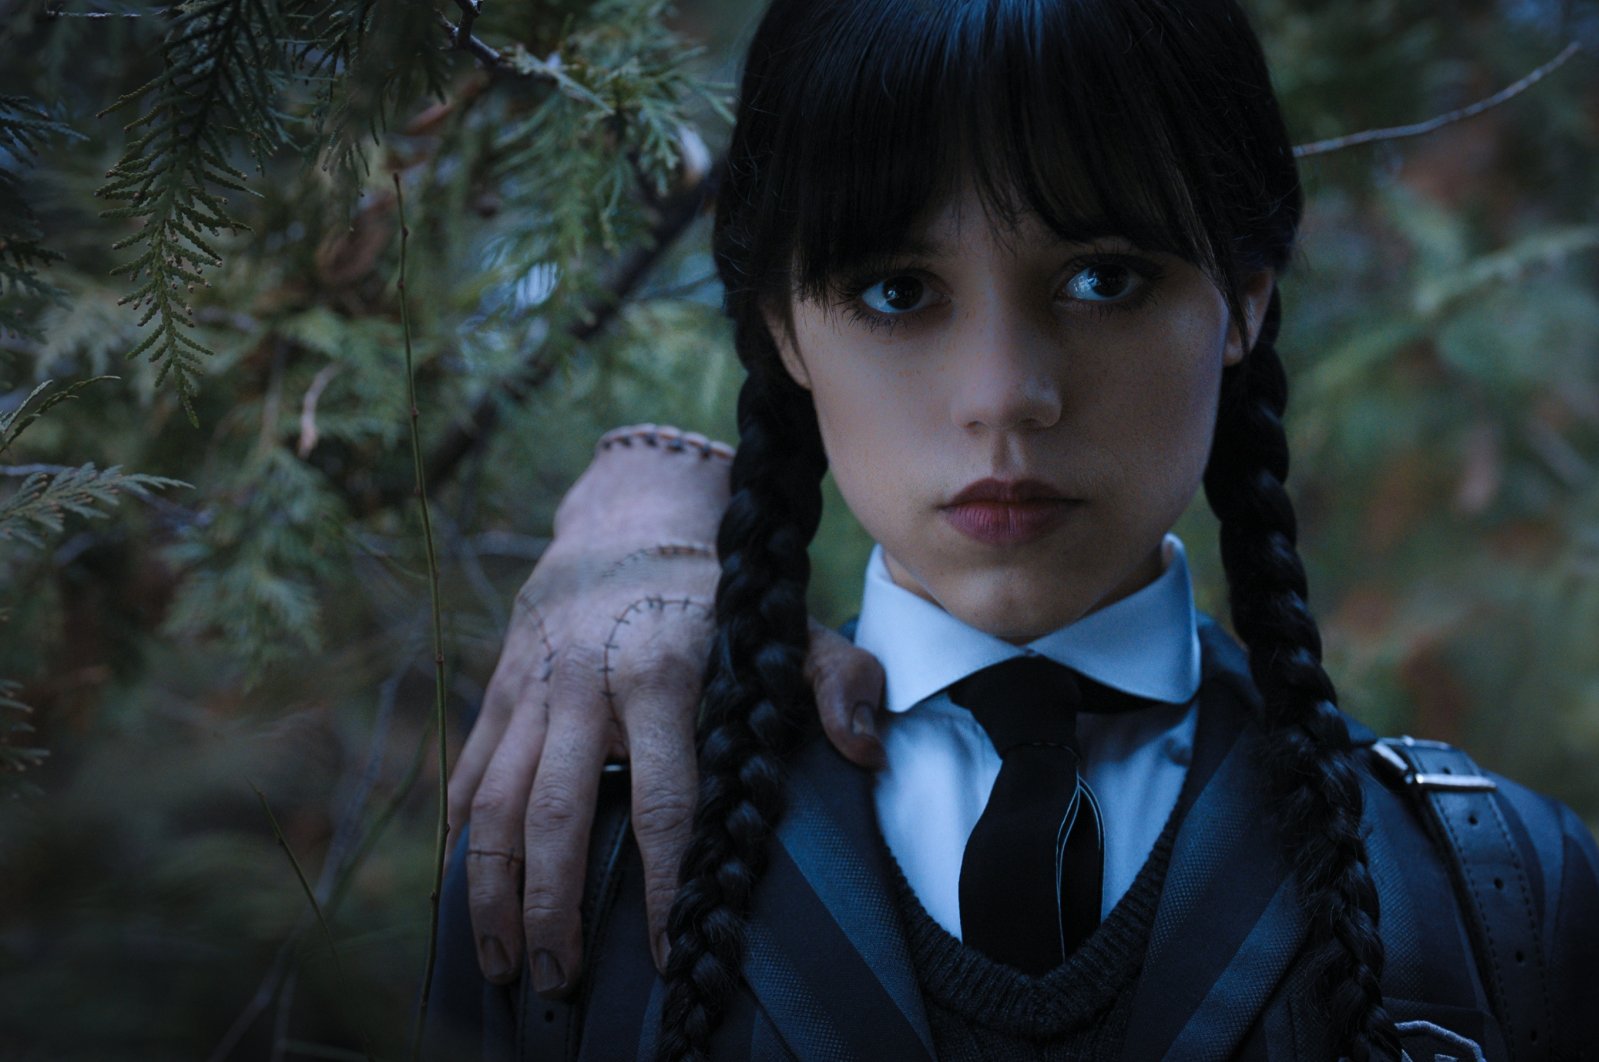 Jenna Ortega stars as Wednesday Addams alongside &quot;Thing&quot; in Netflix&#039;s revival of the Addams Family show. (dpa Photo)